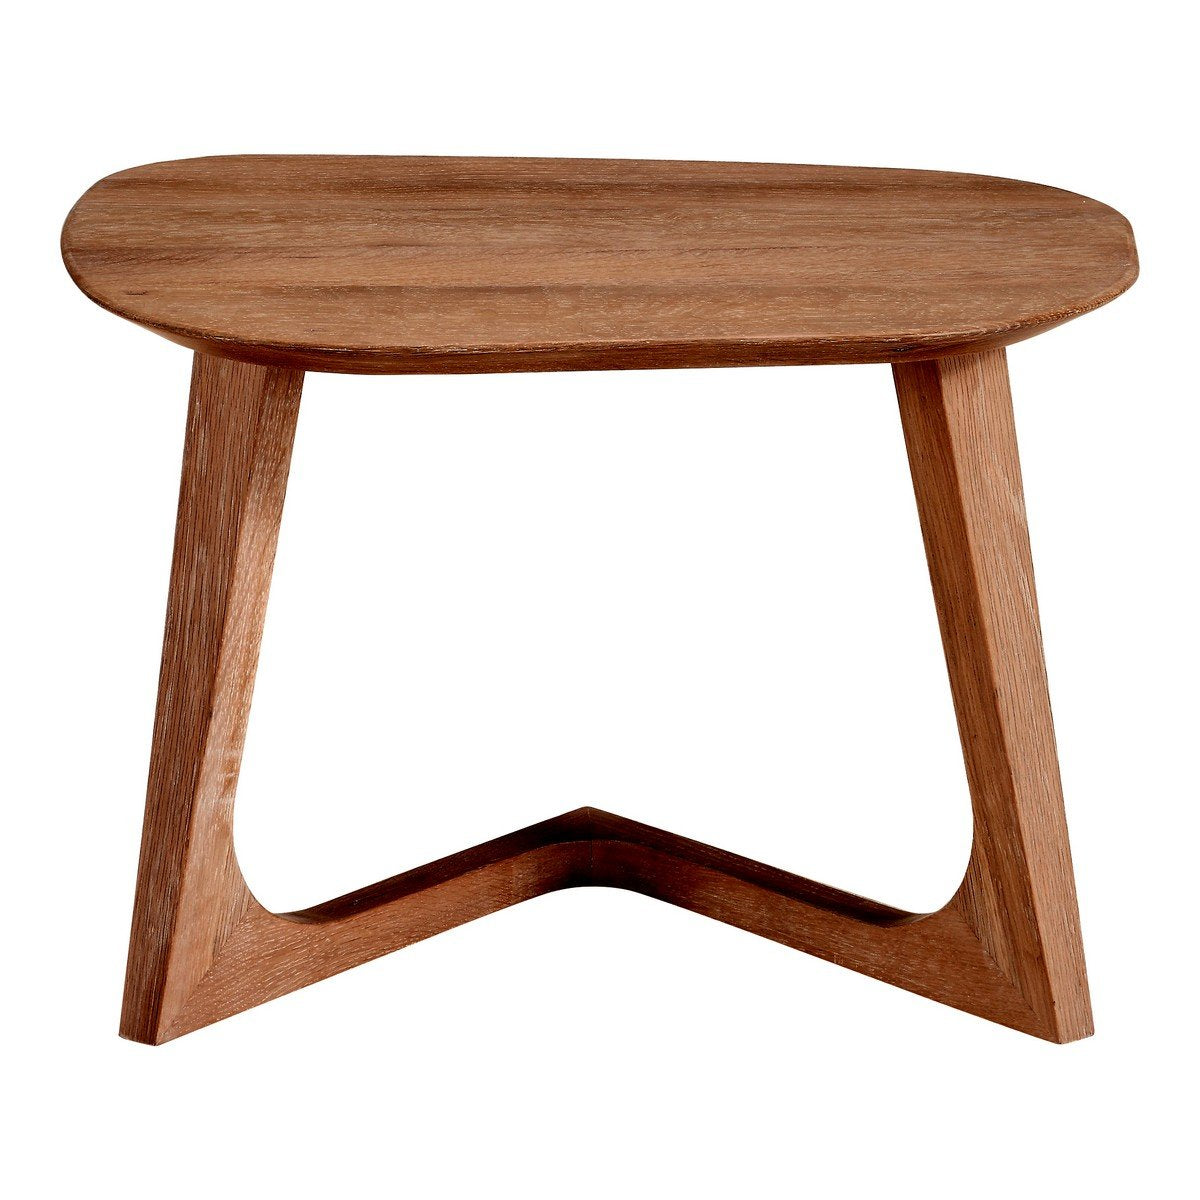 Moe's Home Collection Godenza End Table - CB-1018-03 - Moe's Home Collection - End Tables - Minimal And Modern - 1